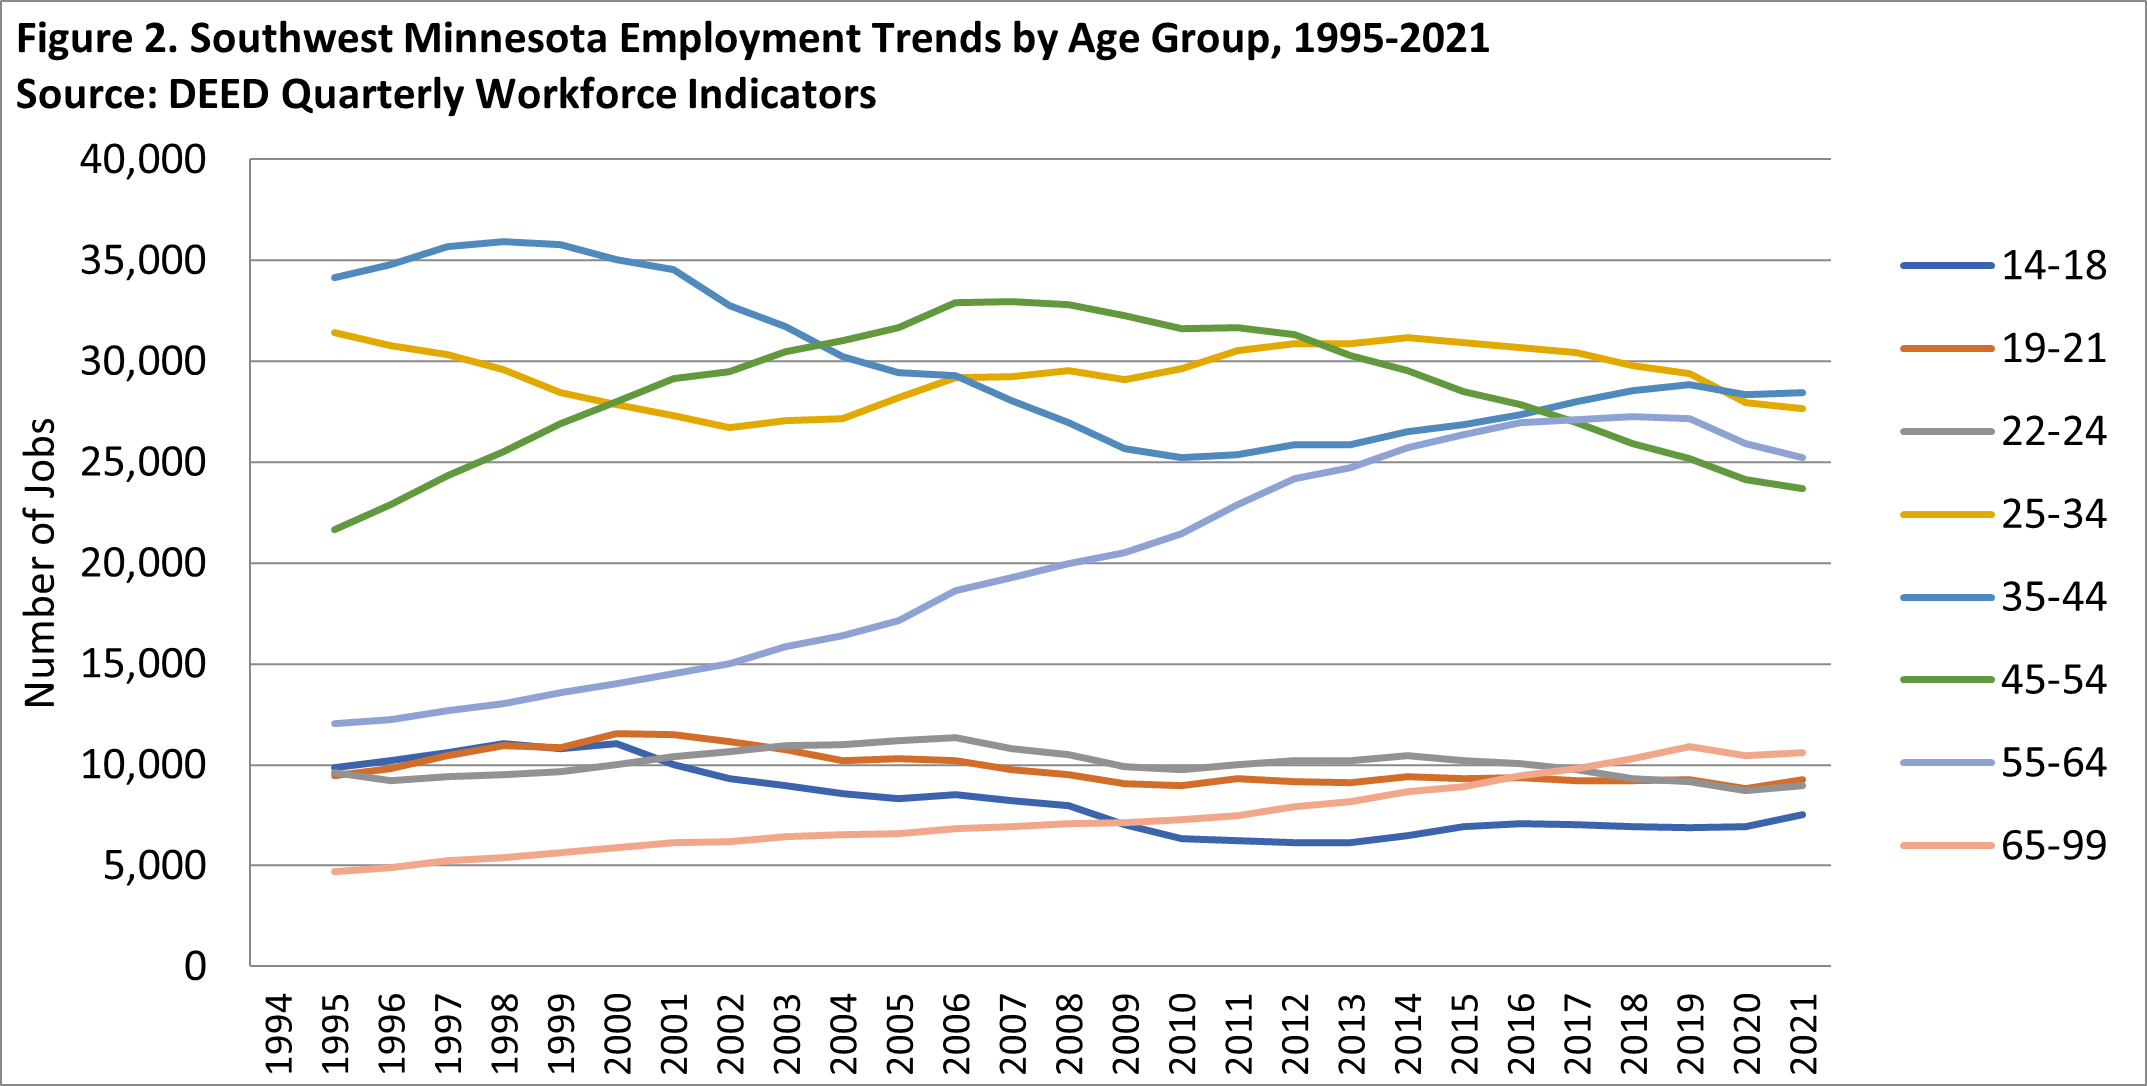 Southwest Minnesota Employment Trends by Age Group